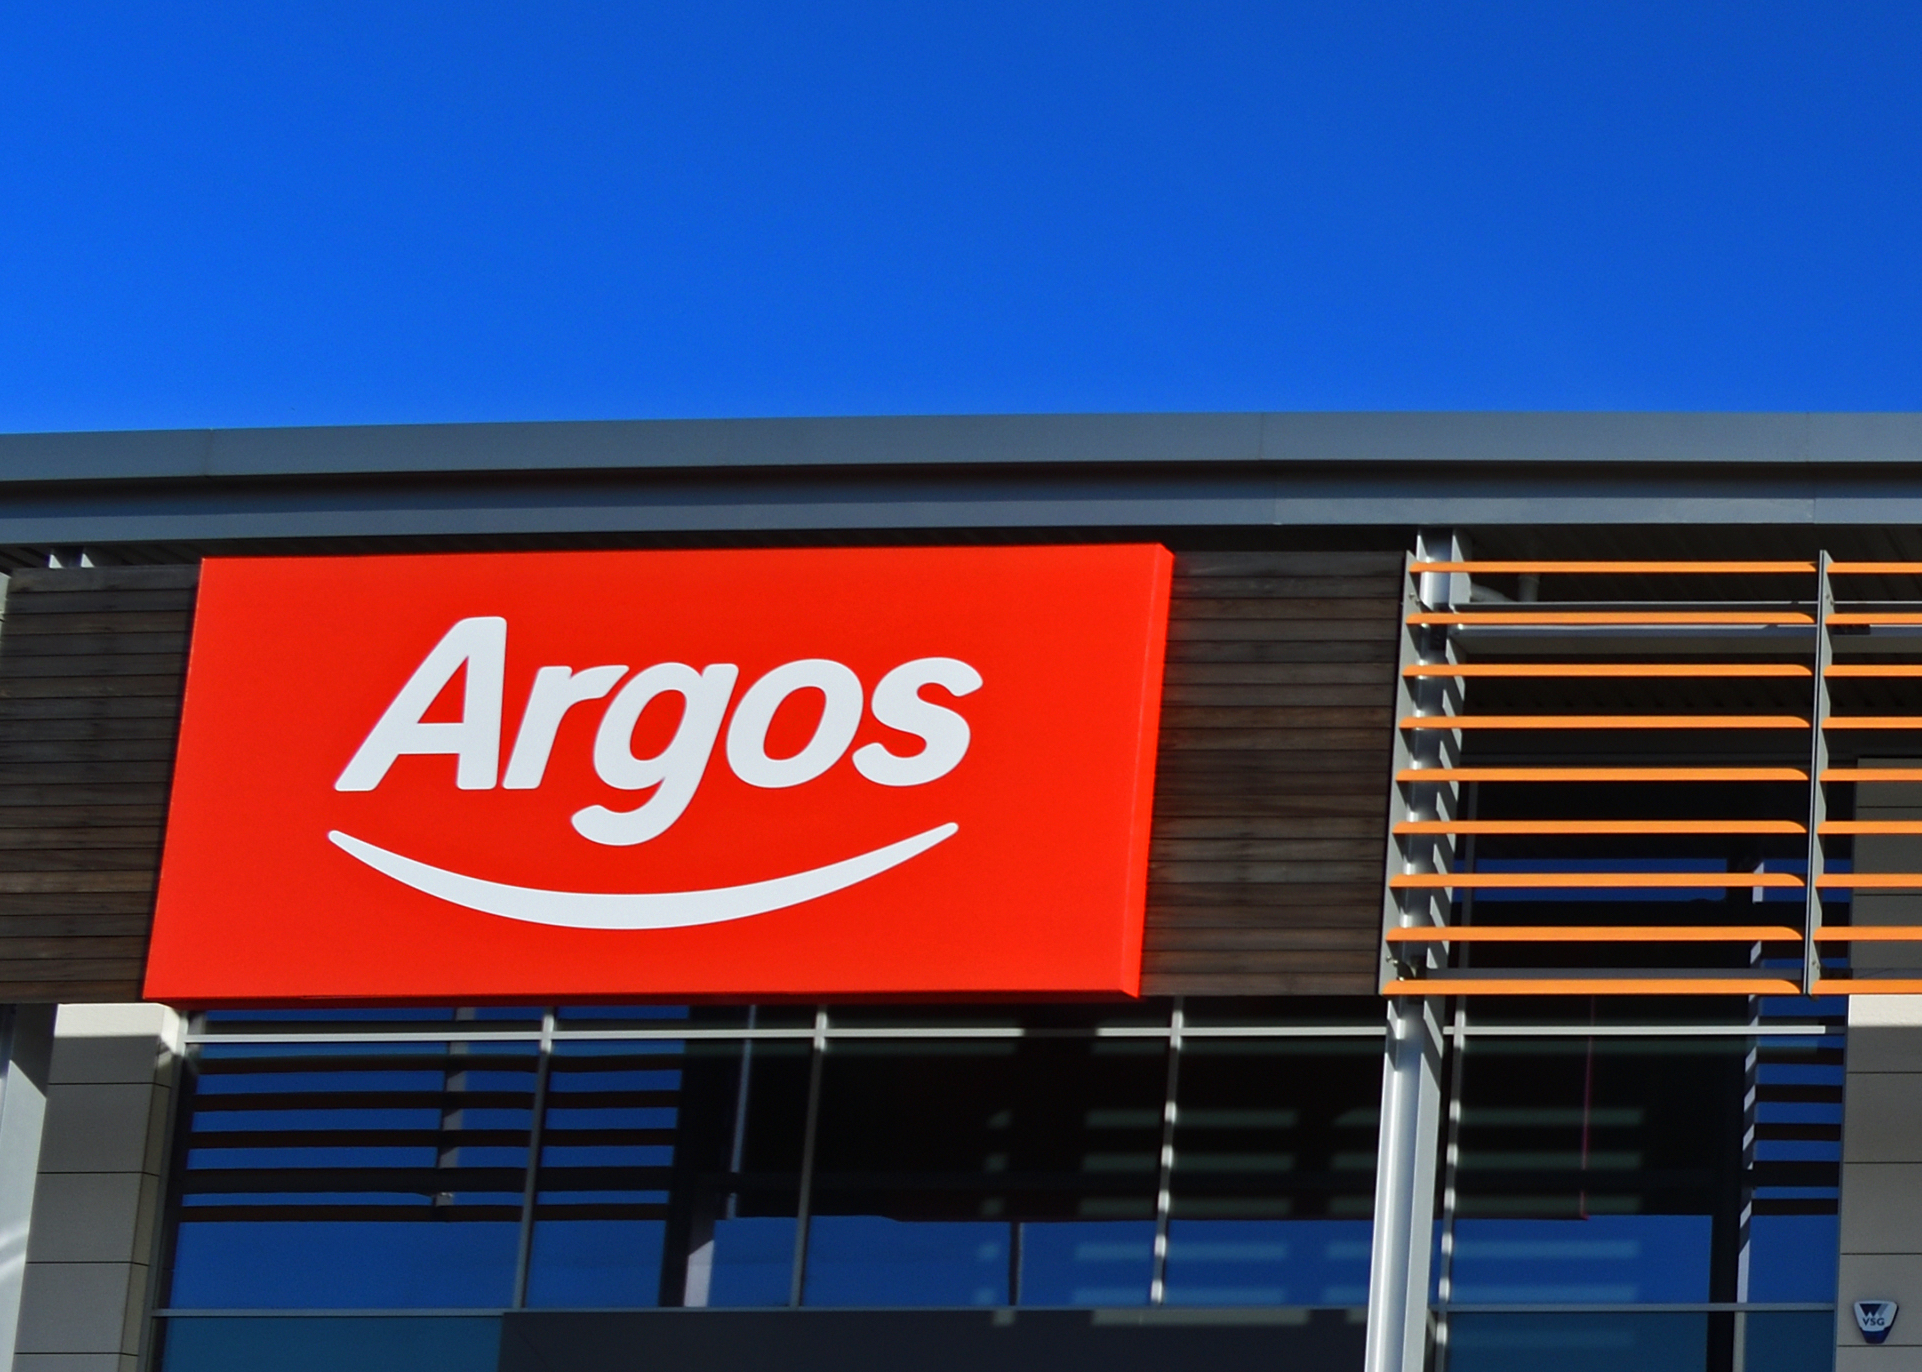 Sainsbury’s to close two Argos depots in warehouse shake up with 1,400 jobs at risk